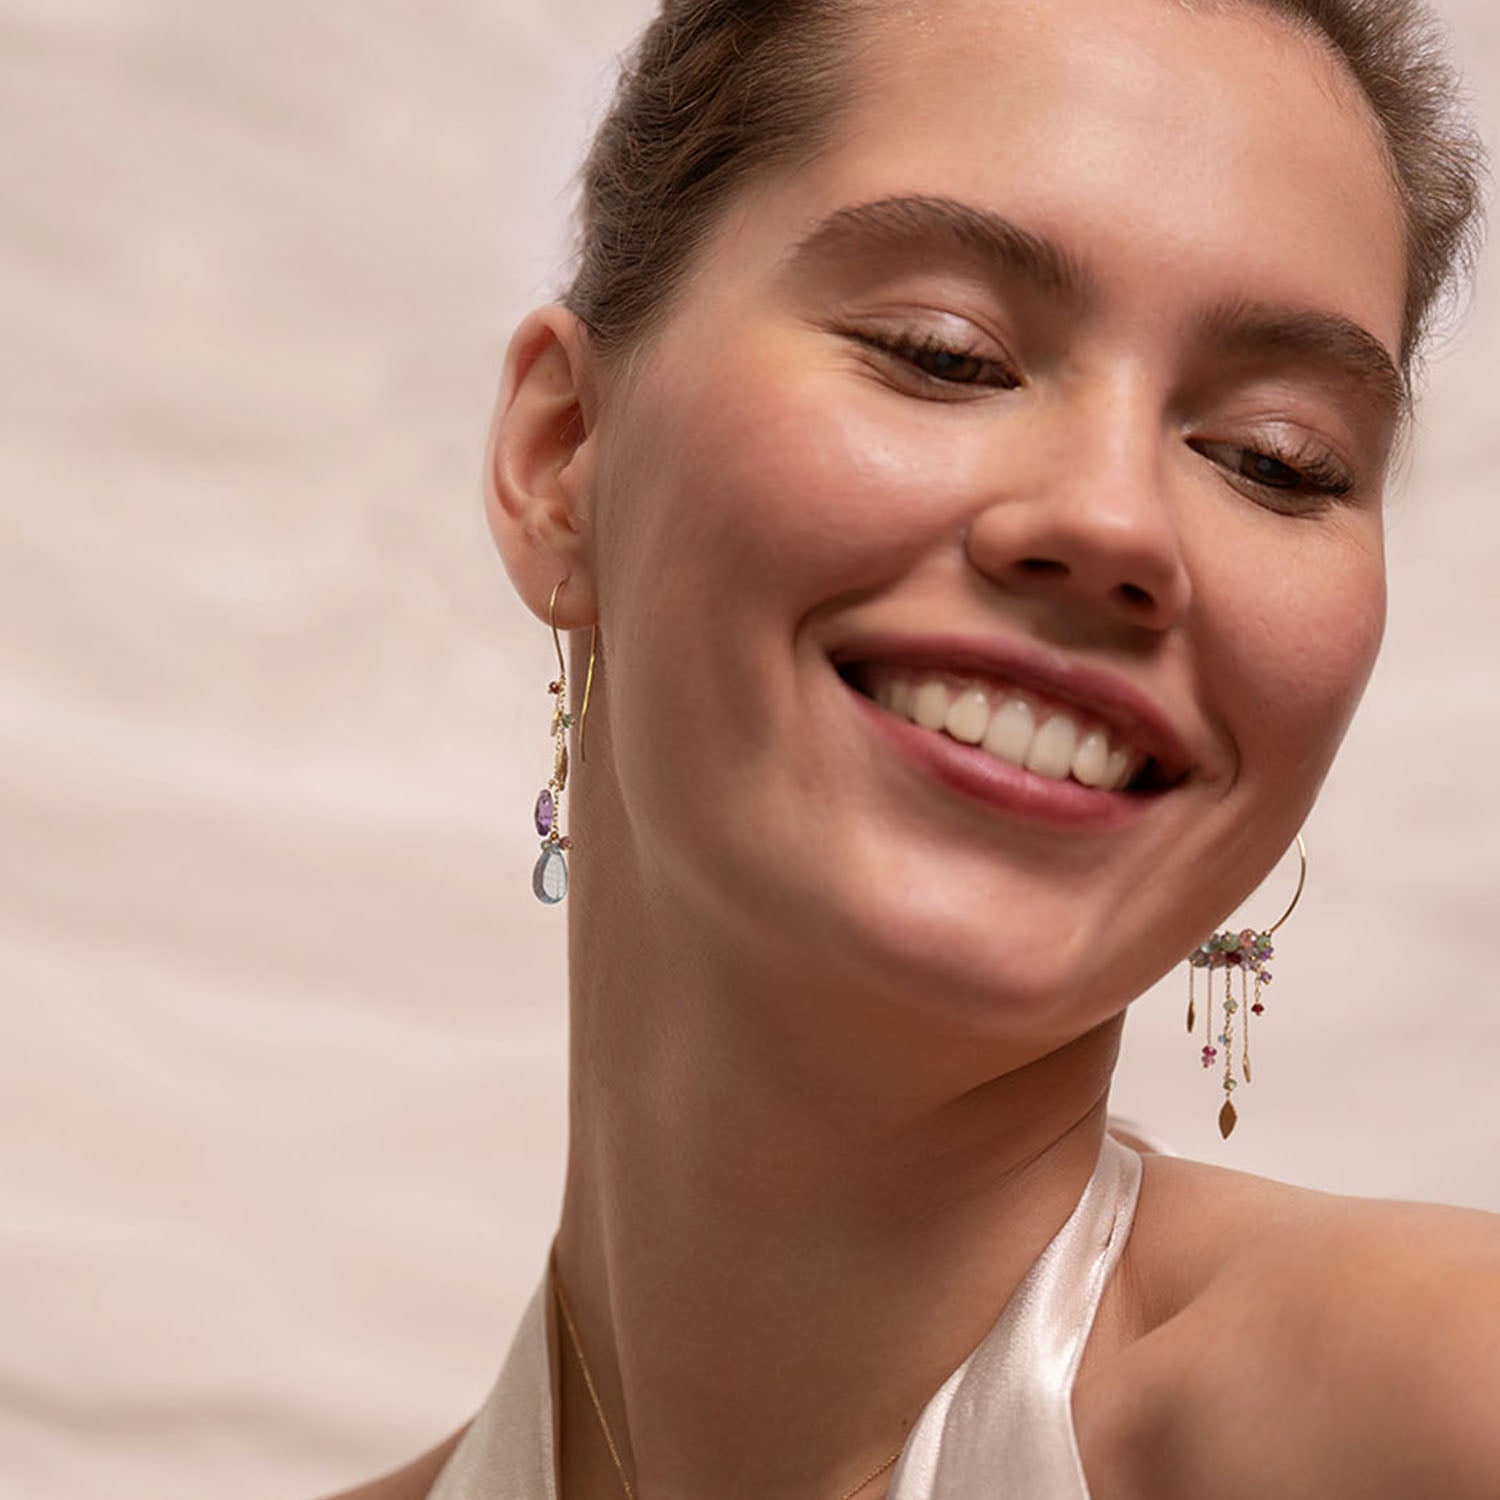 18ct Gold hook earrings with a cluster of stones and glistening gold leaves worn by model